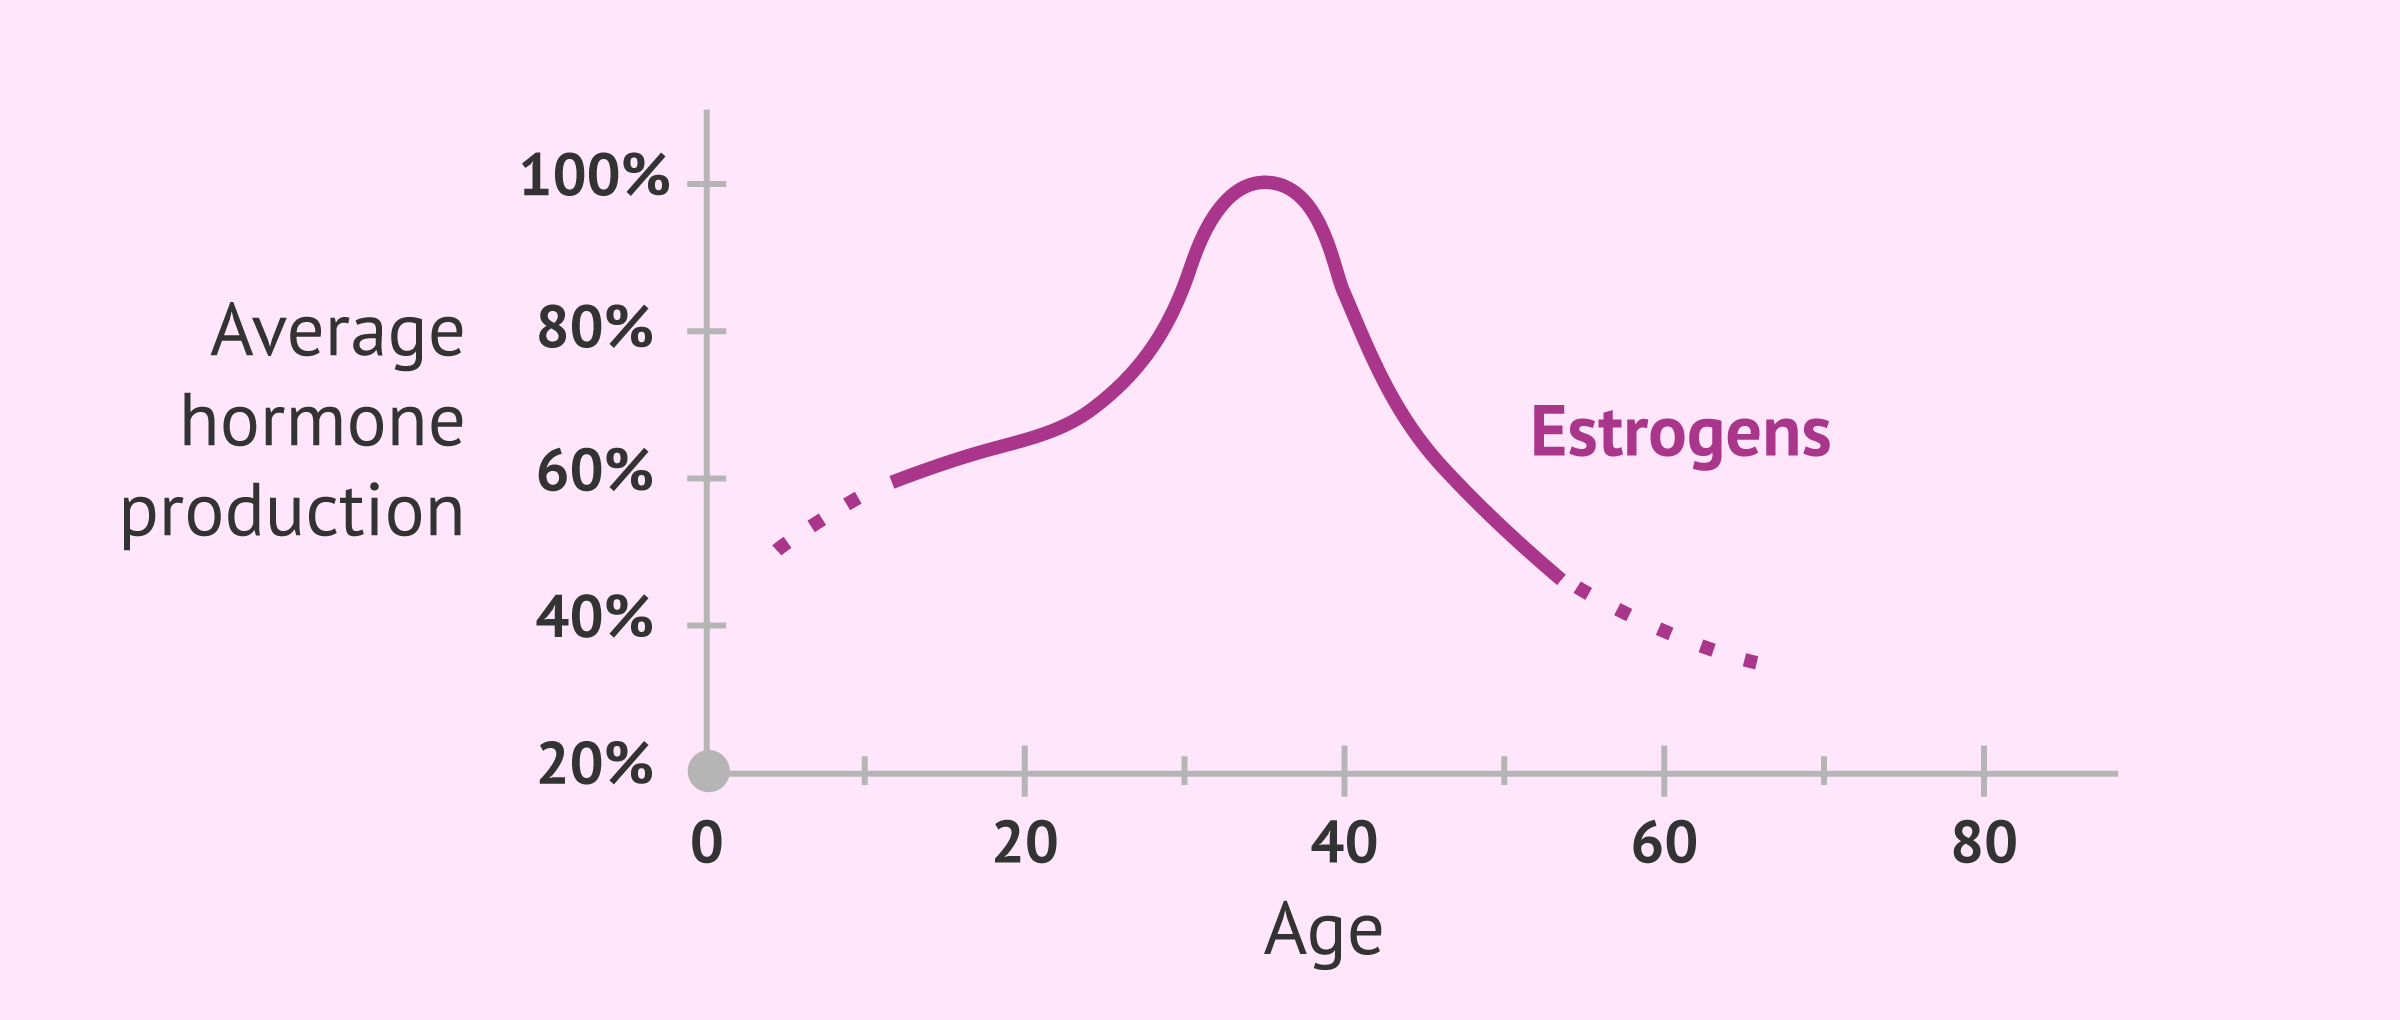 Decrease in estrogen levels with age